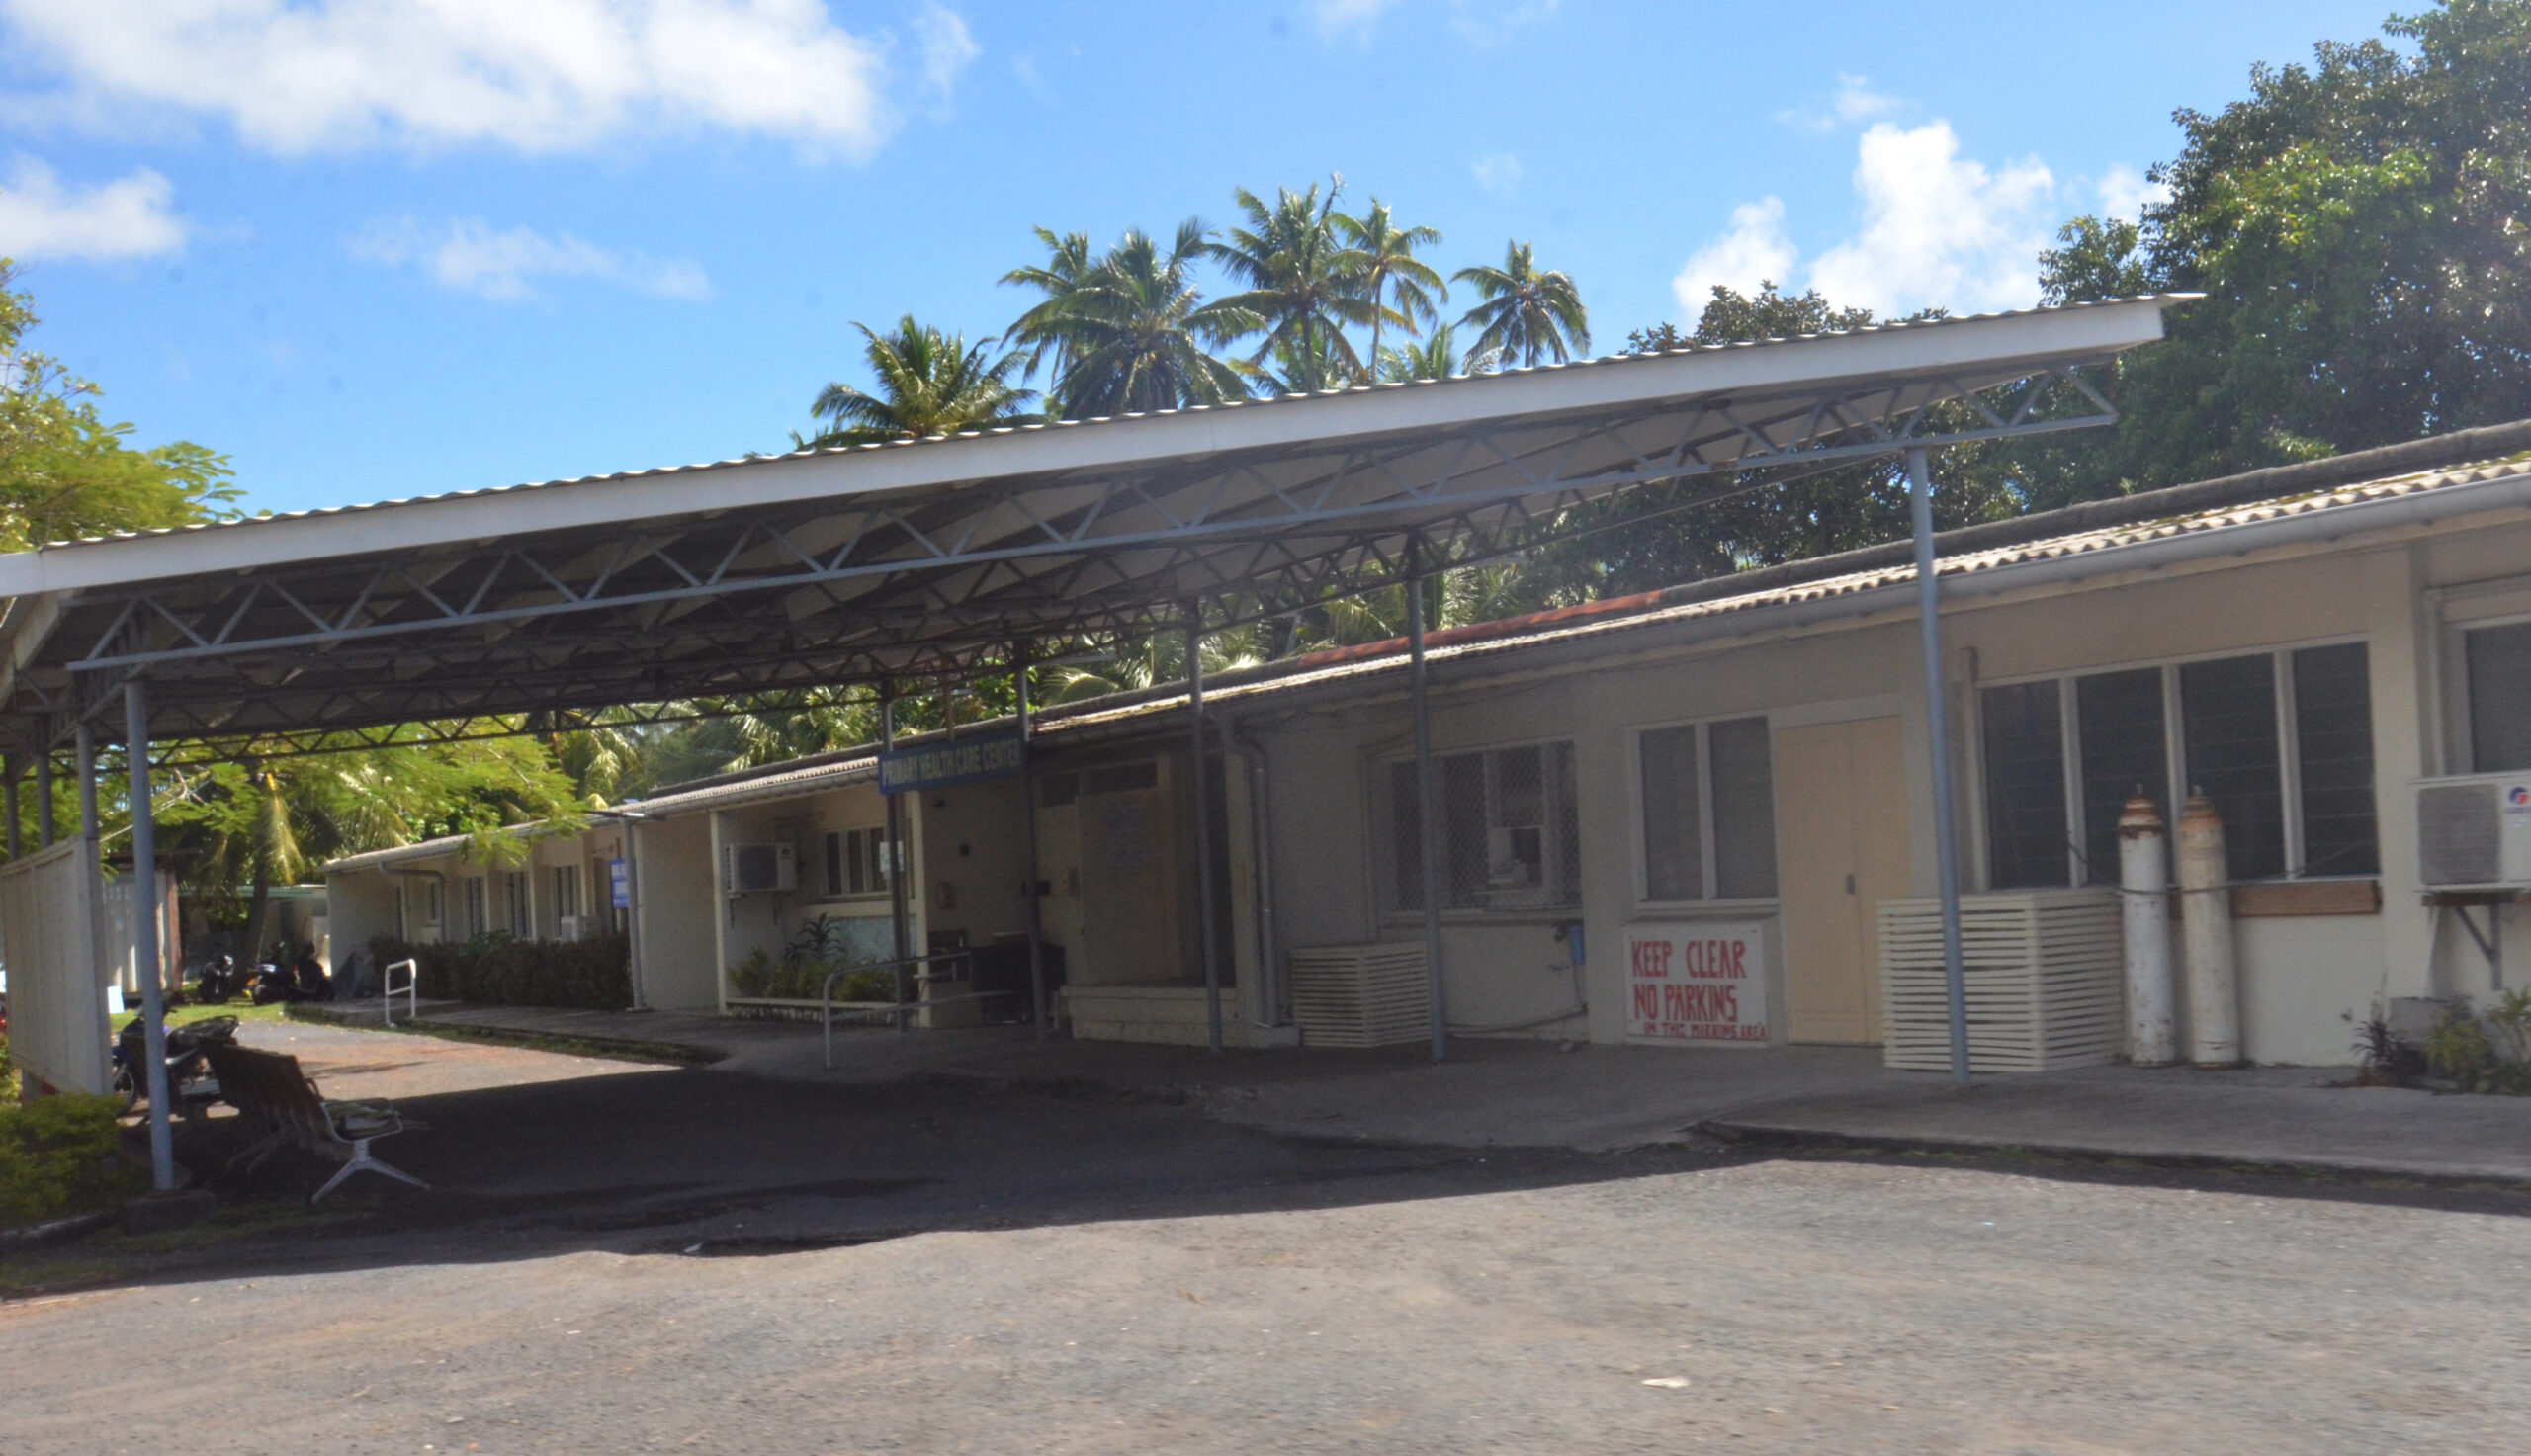 Tupapa Clinic to undergo asbestos removal, dental and health care services to relocate